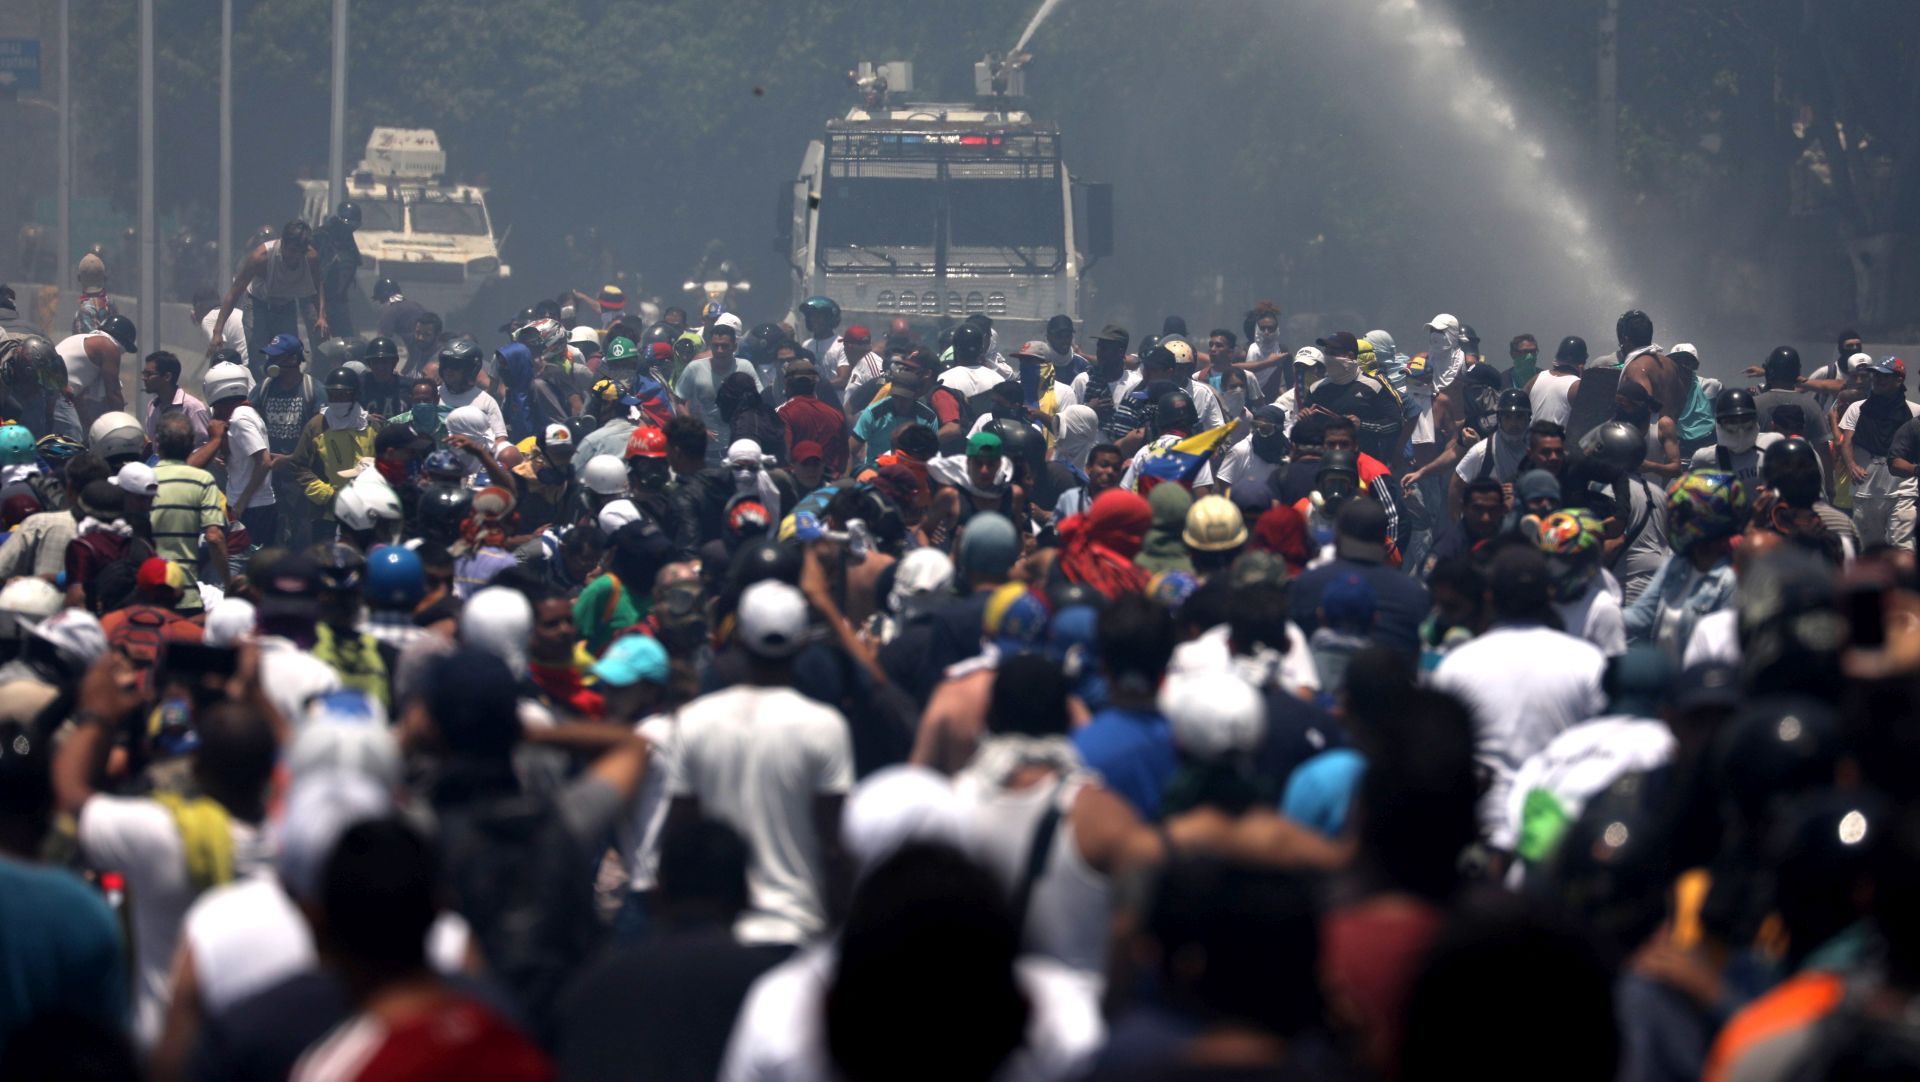 epa07538456 Supporters of President of the Venezuelan Parliament confront armored trucks of the Bolivarian Armed Forces during a protest at the Altamira area, in Caracas, Venezuela, 30 April 2019. Venezuelan interim President Juan Guaido has asked supporters to take to the streets in order to end the regime of President Nicolas Maduro. Meanwhile, Venezuelan opposition leader Leopoldo Lopez was freed from his house arrest, appearing alongside Guaido and military forces in Caracas.  EPA/Miguel Gutierrez